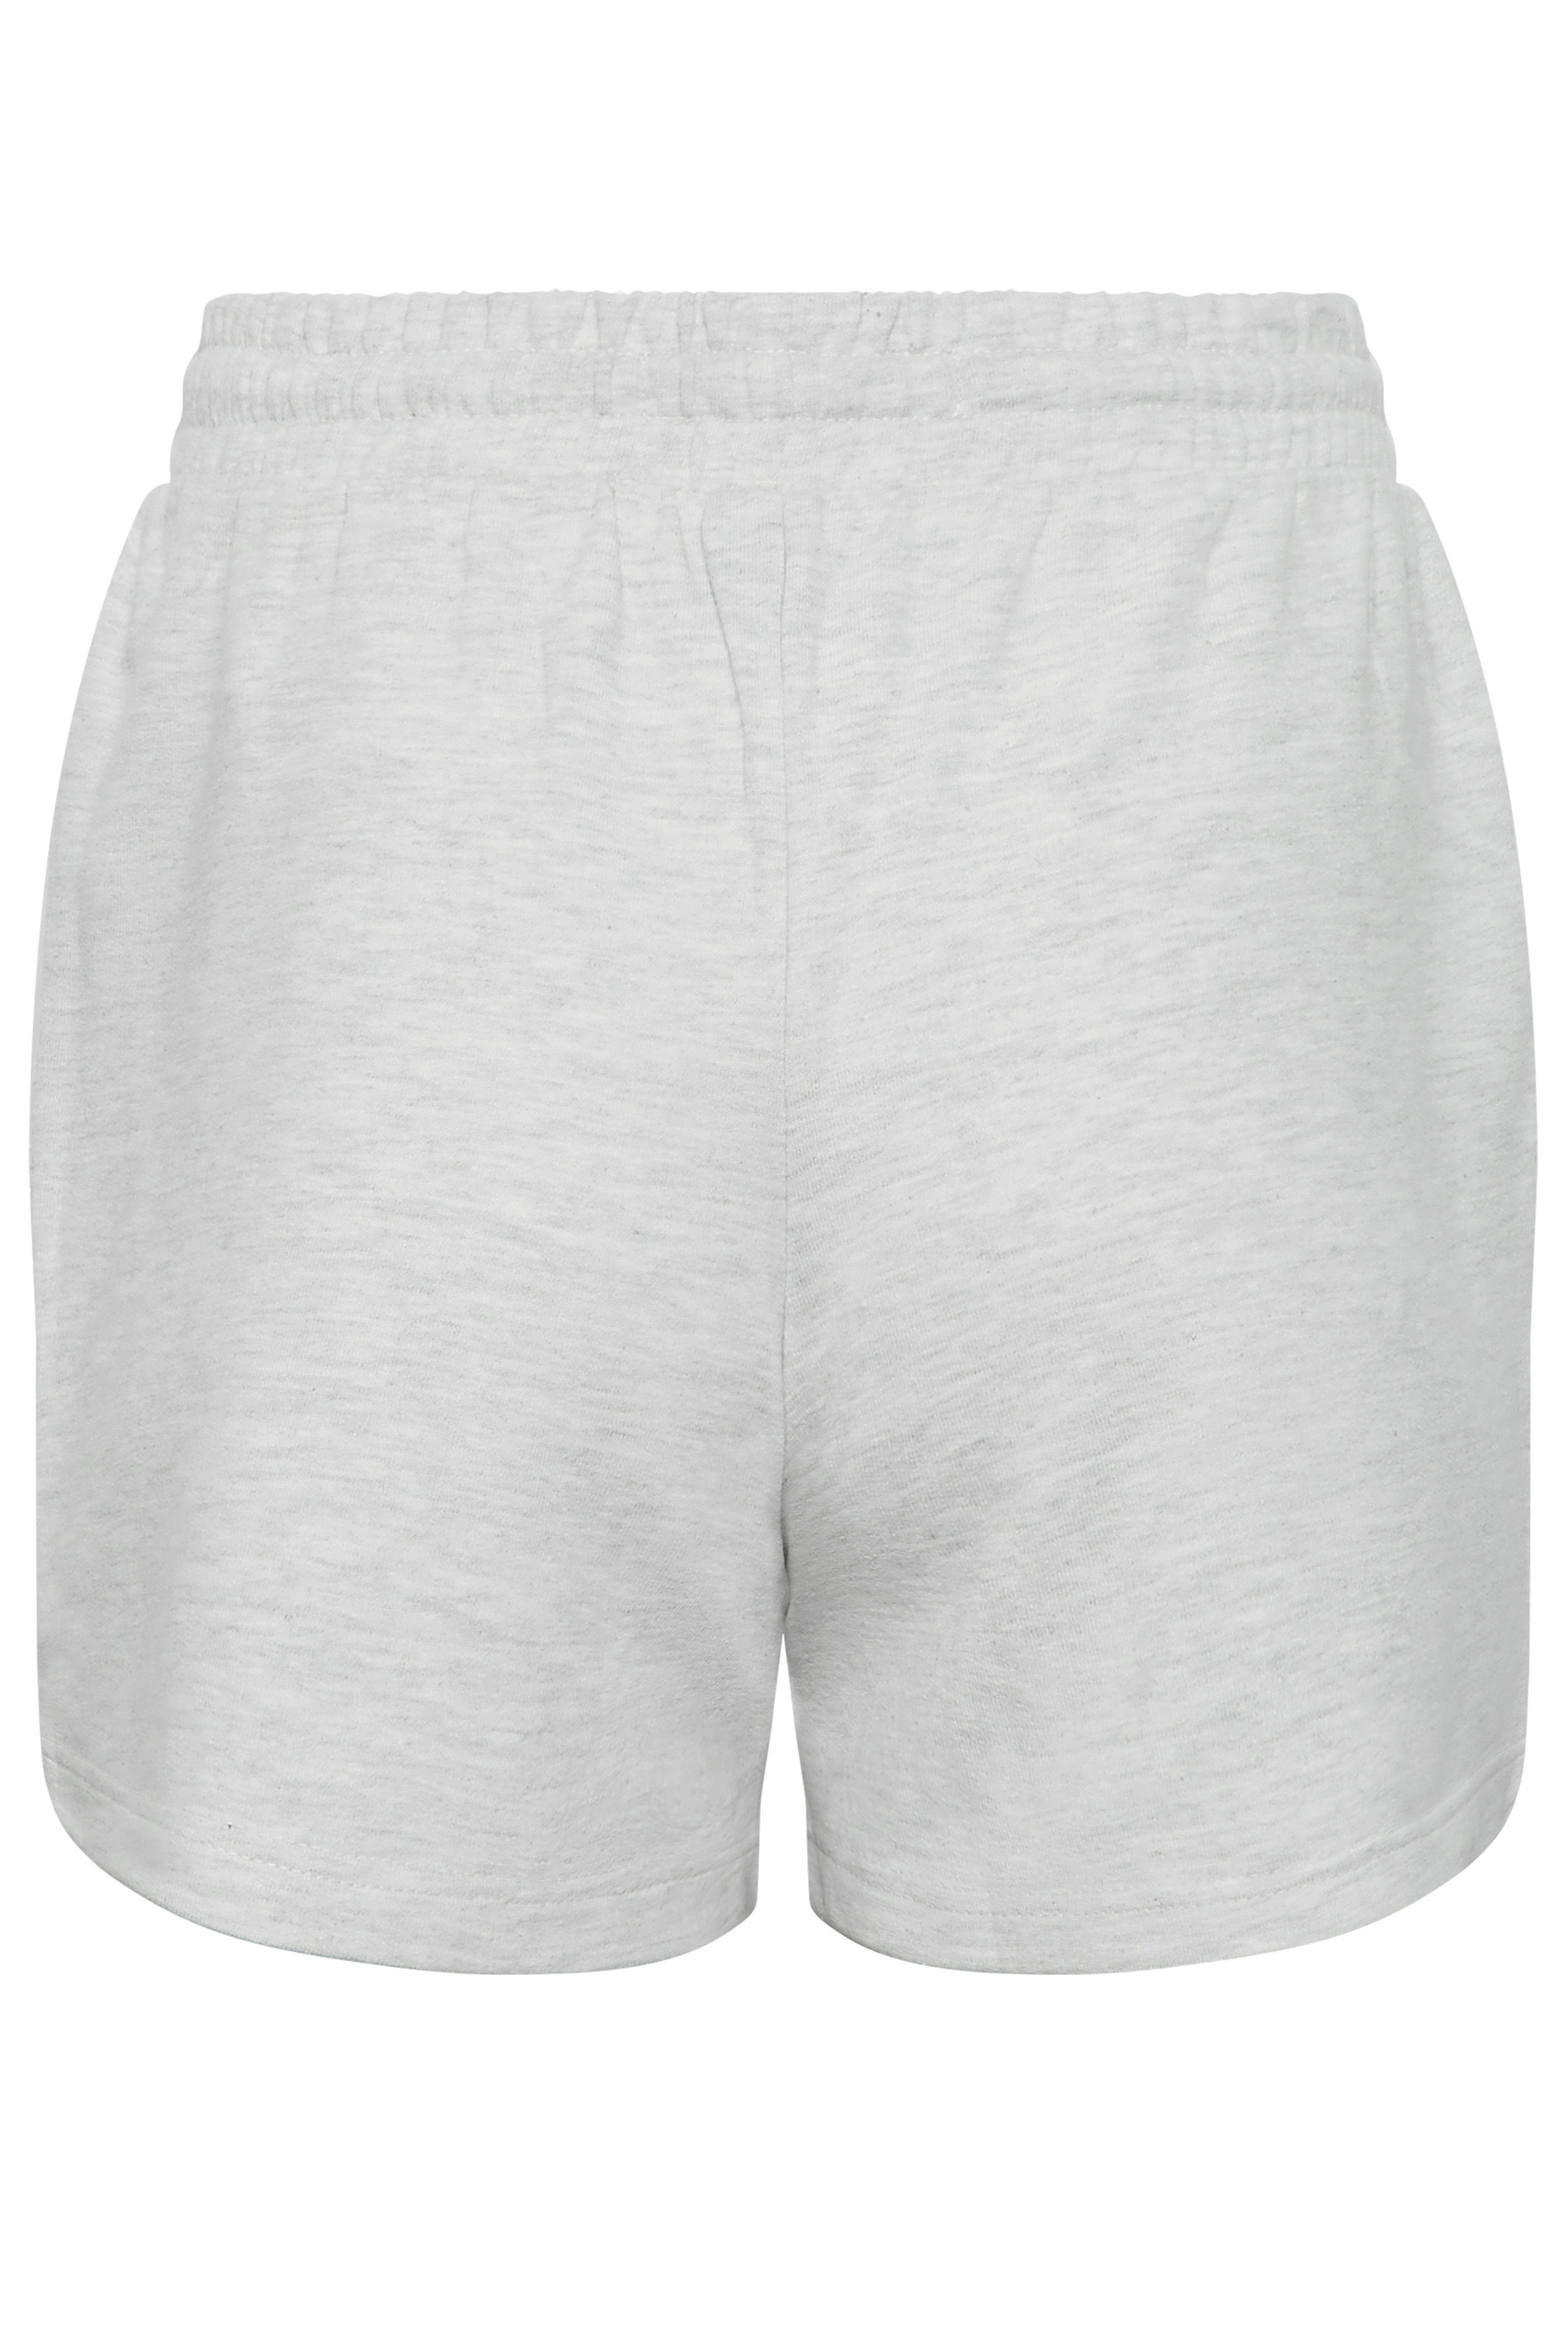 YOURS PETITE Plus Size Grey Marl Jersey Shorts | Yours Clothing 2